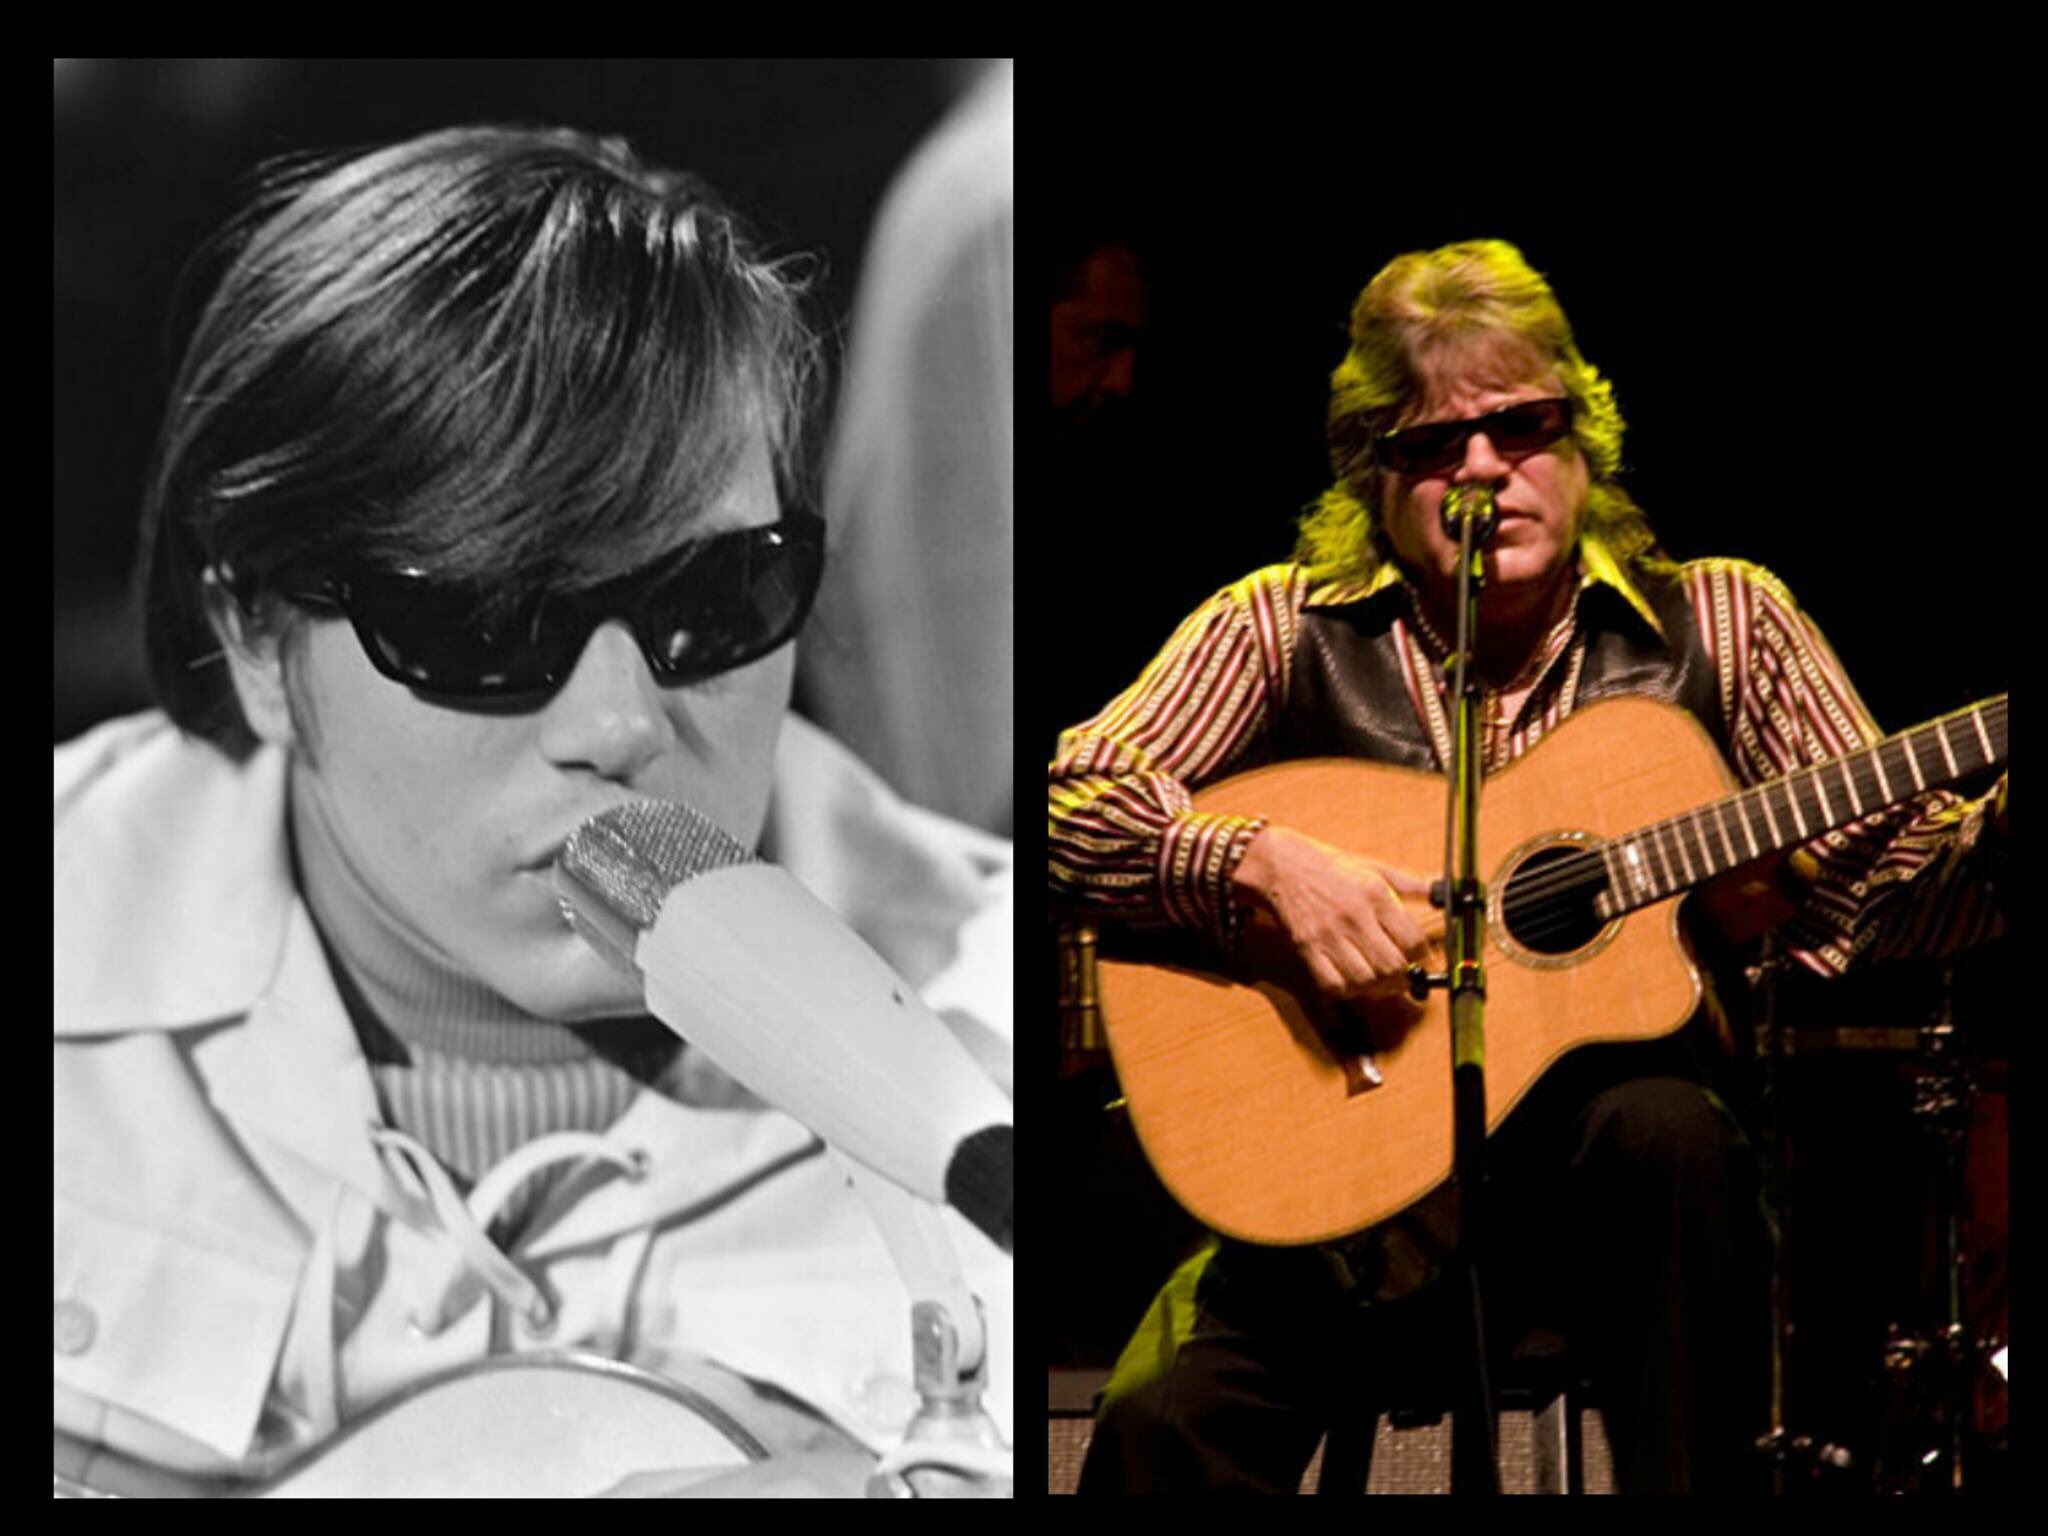 Today in History
September 10th
HAPPY BIRTHDAY
1945 Jose Feliciano, Singer, turns 73  